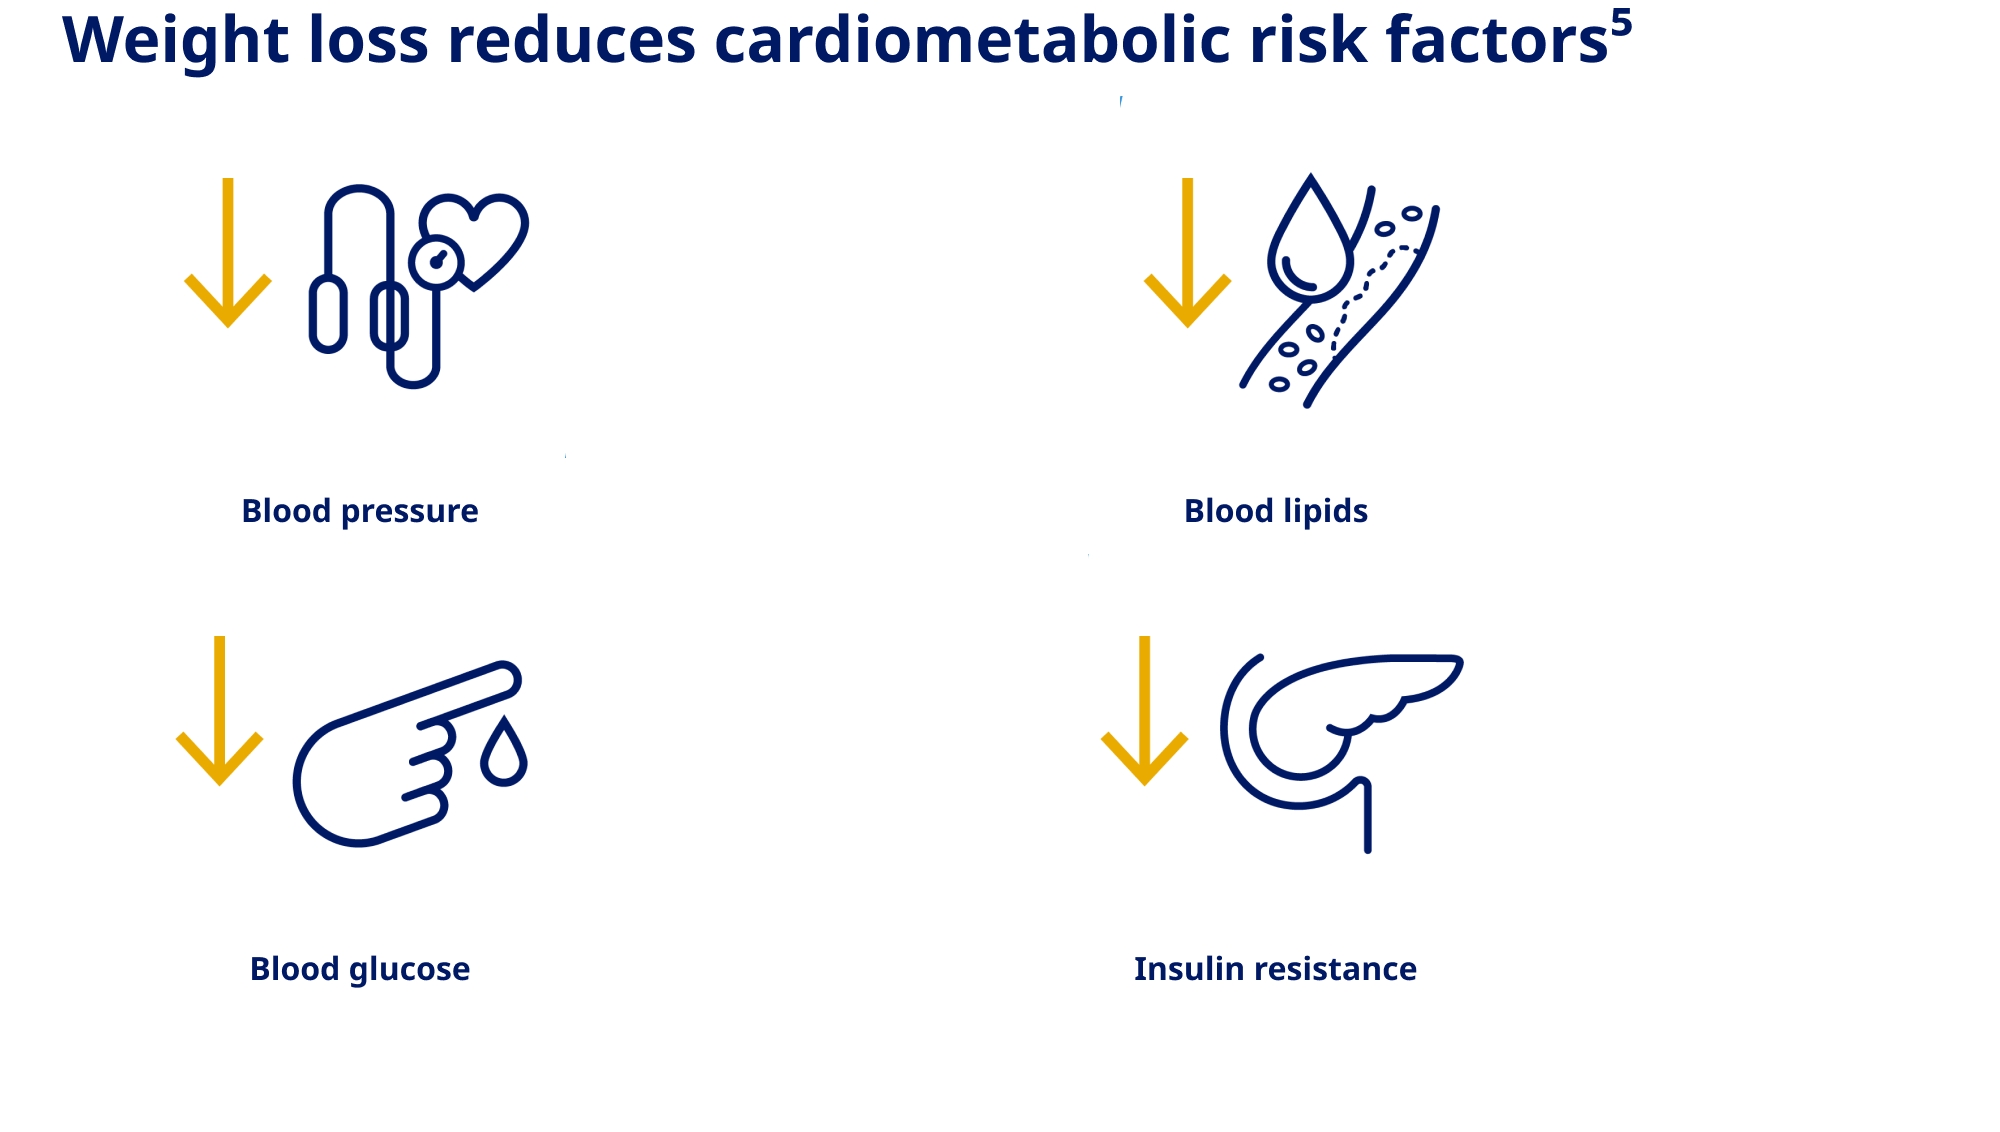 Weight loss reduces cardiometabolic risk factors